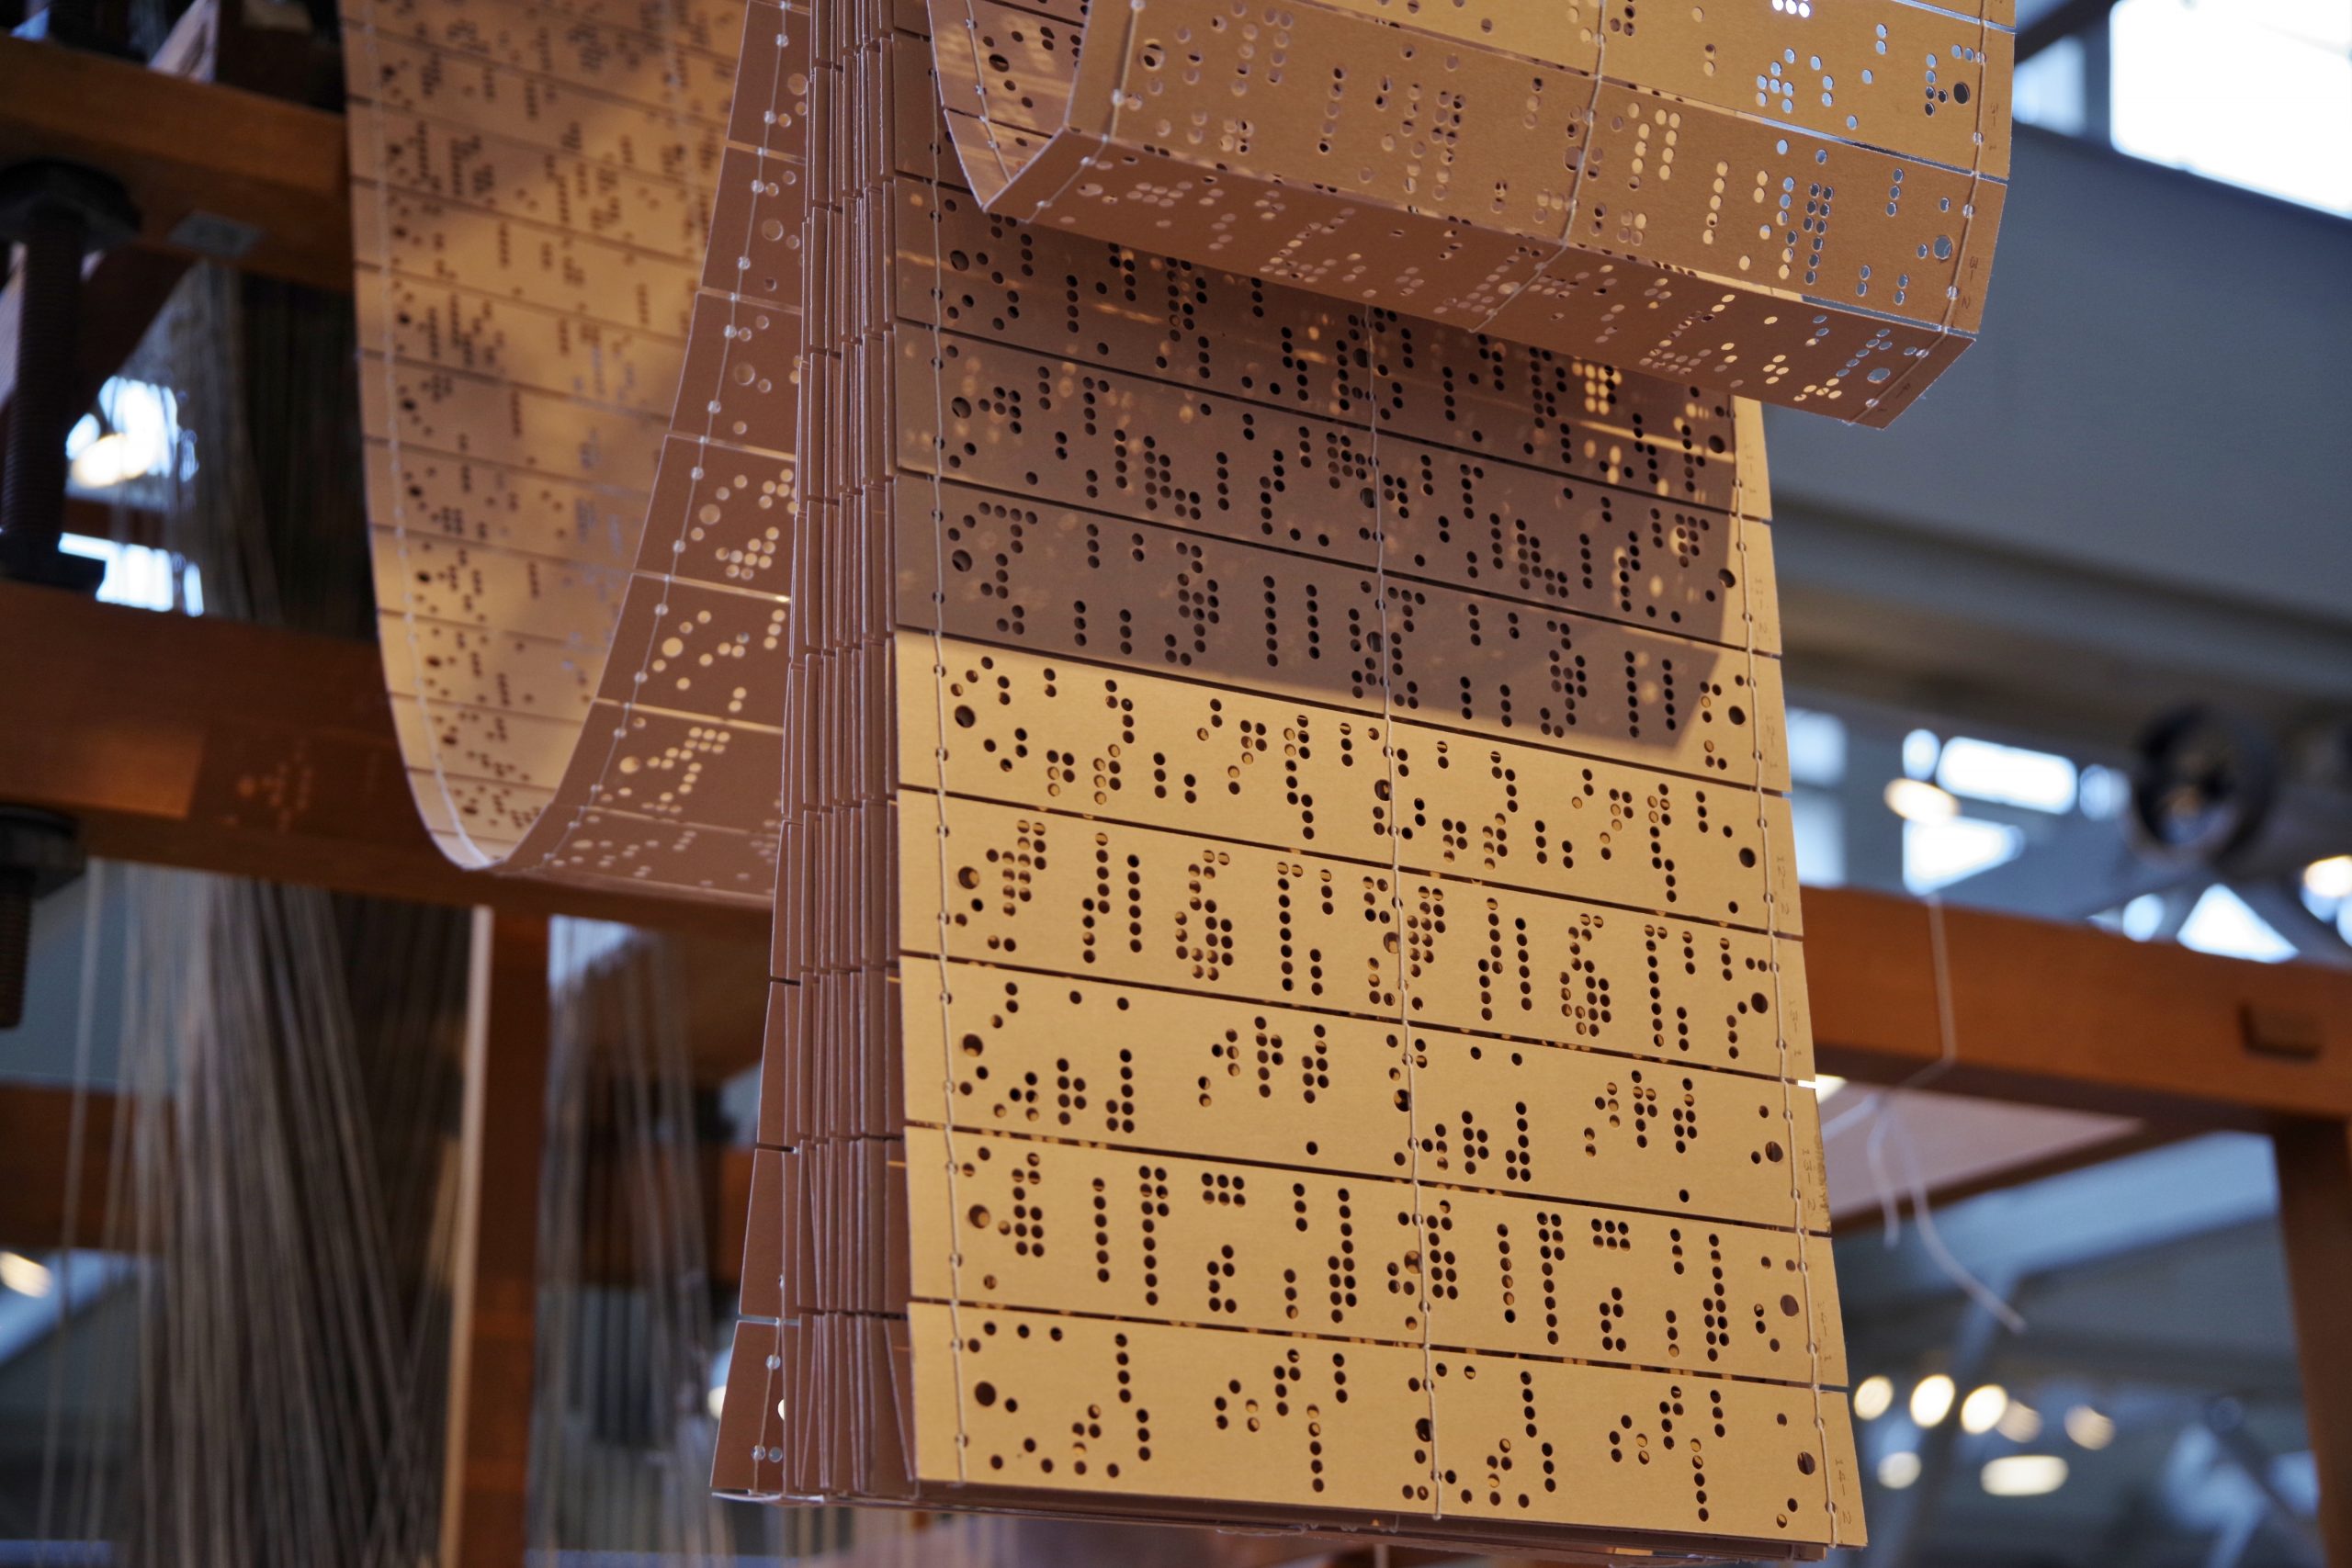 Punch cards of jacquard loom